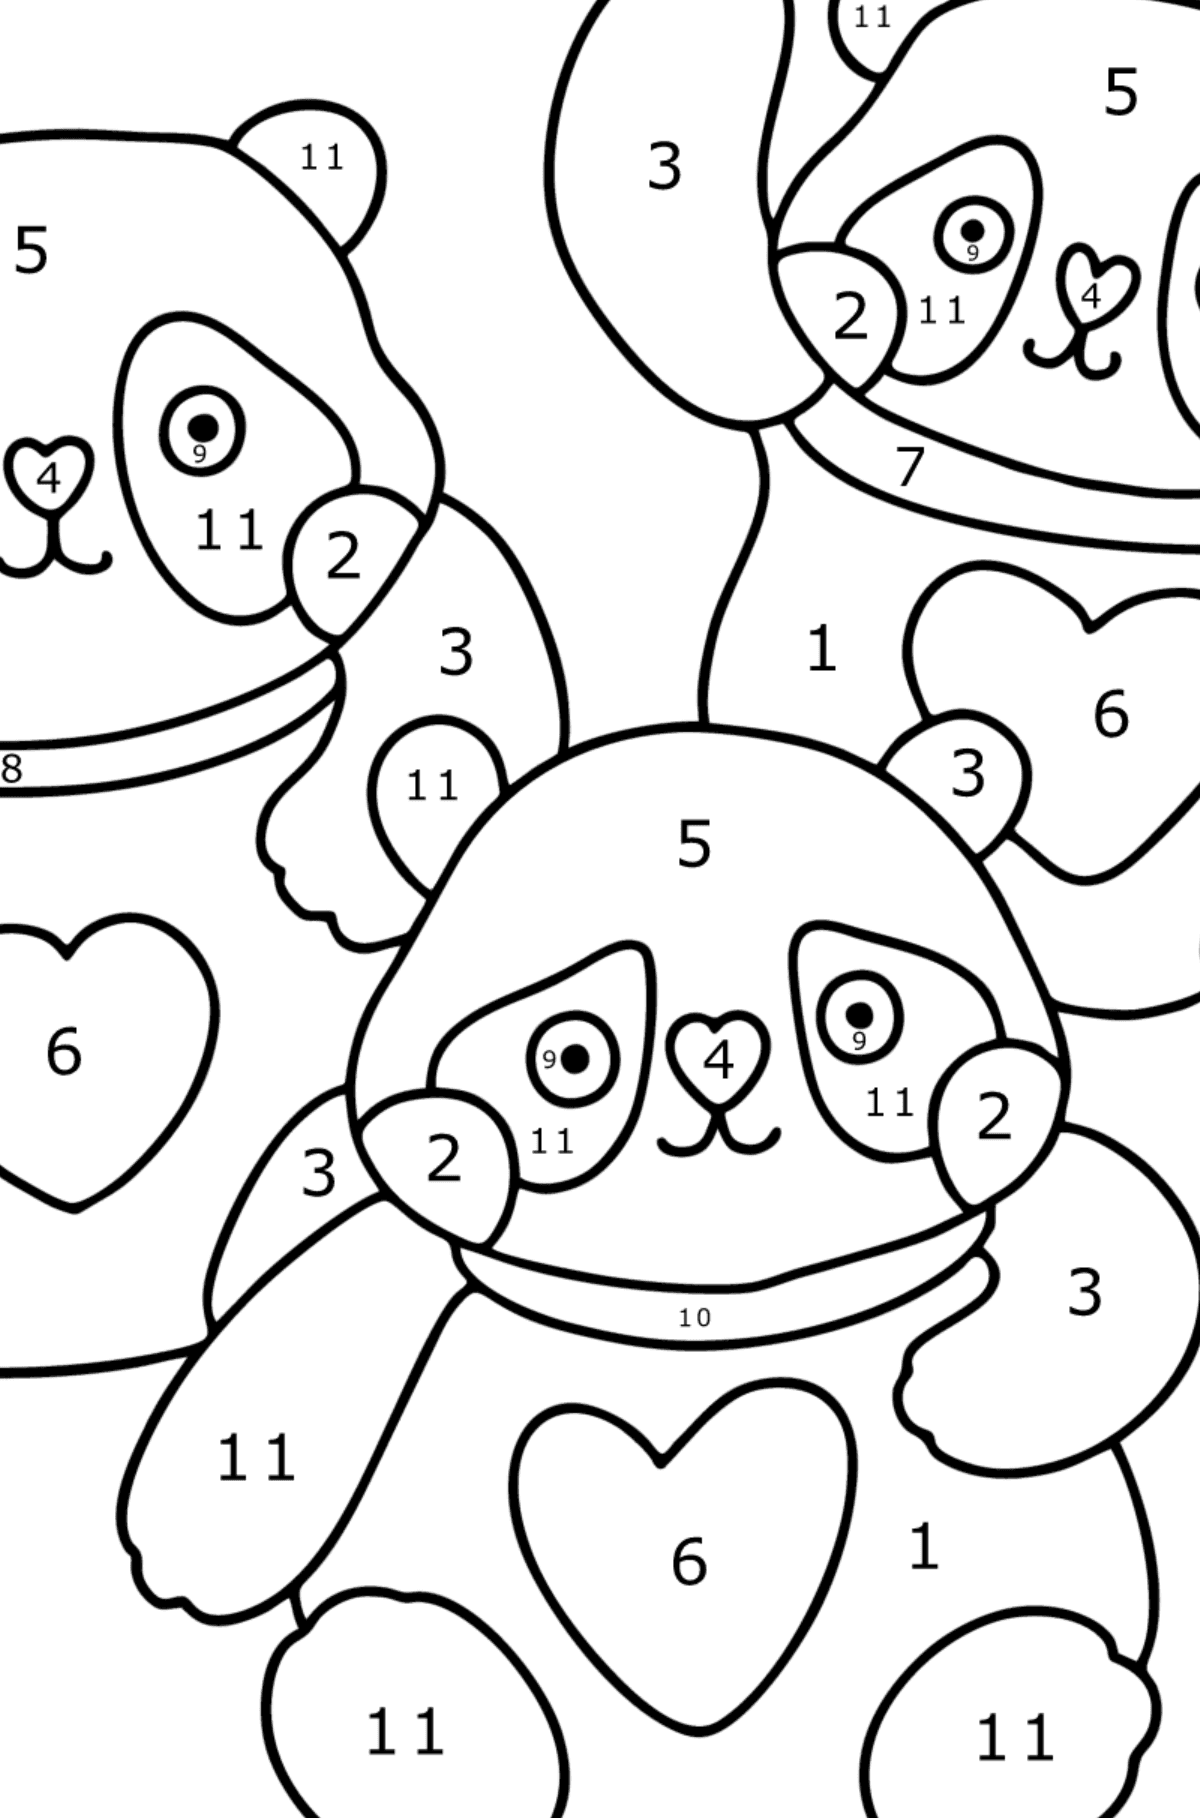 Kawaii pandas coloring page - Coloring by Numbers for Kids